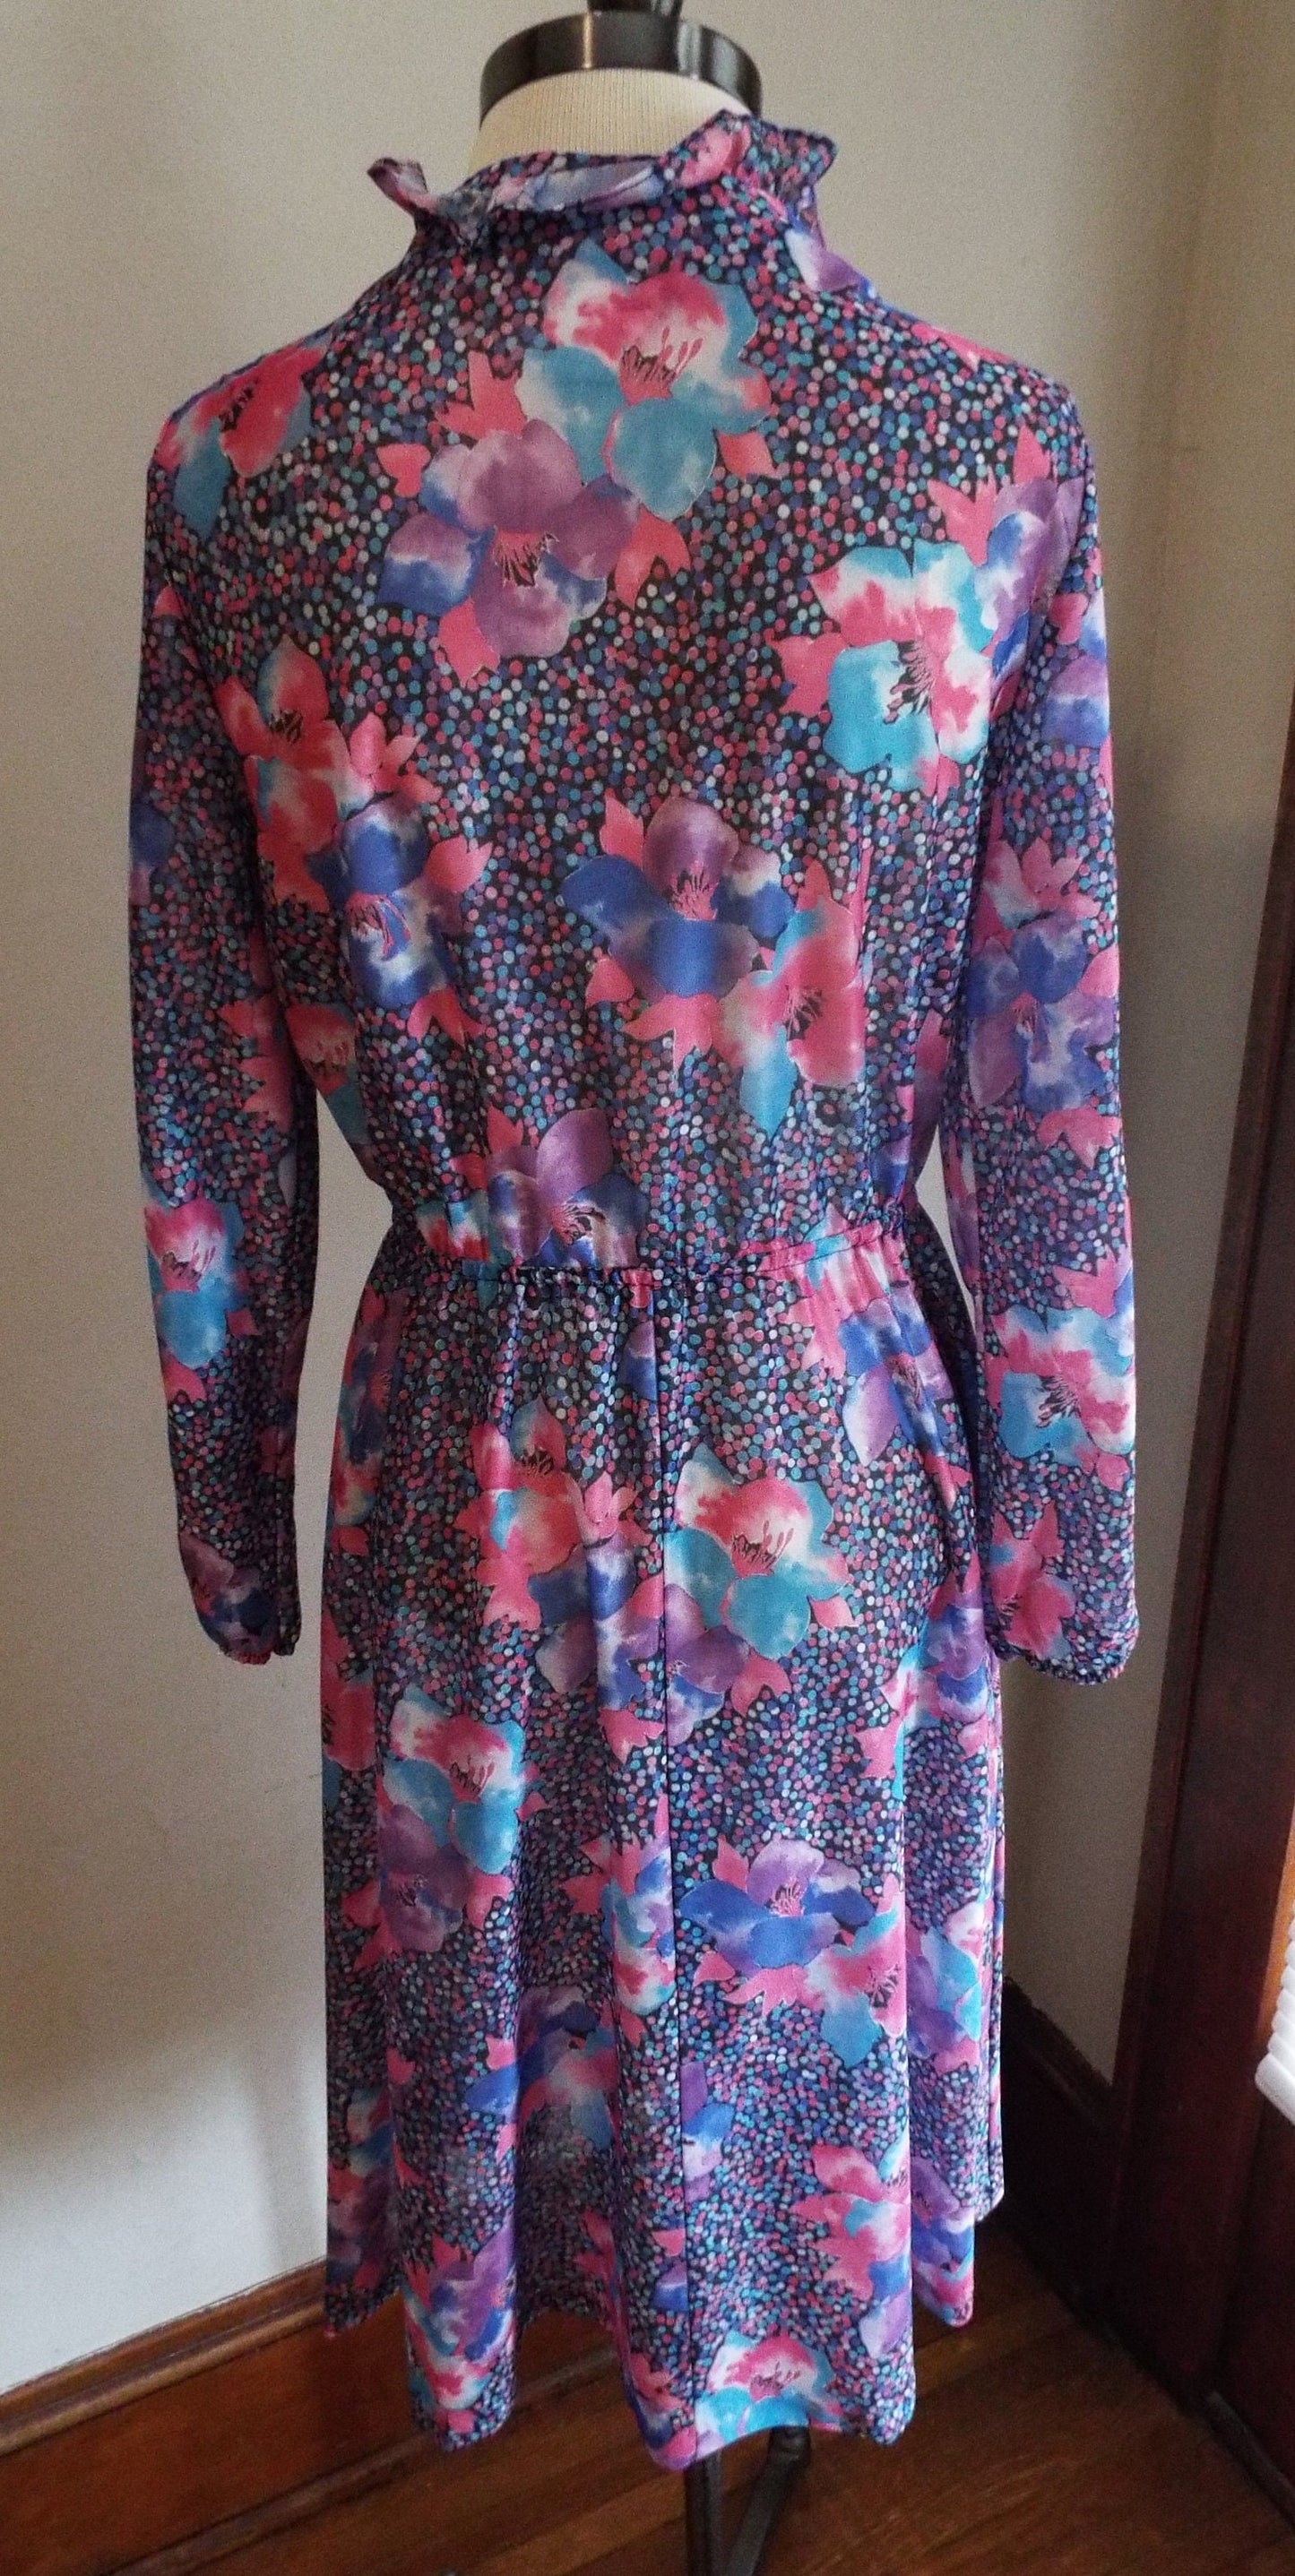 Vintage Long Sleeve Floral and Polka Dot Dress by Montgomery Ward